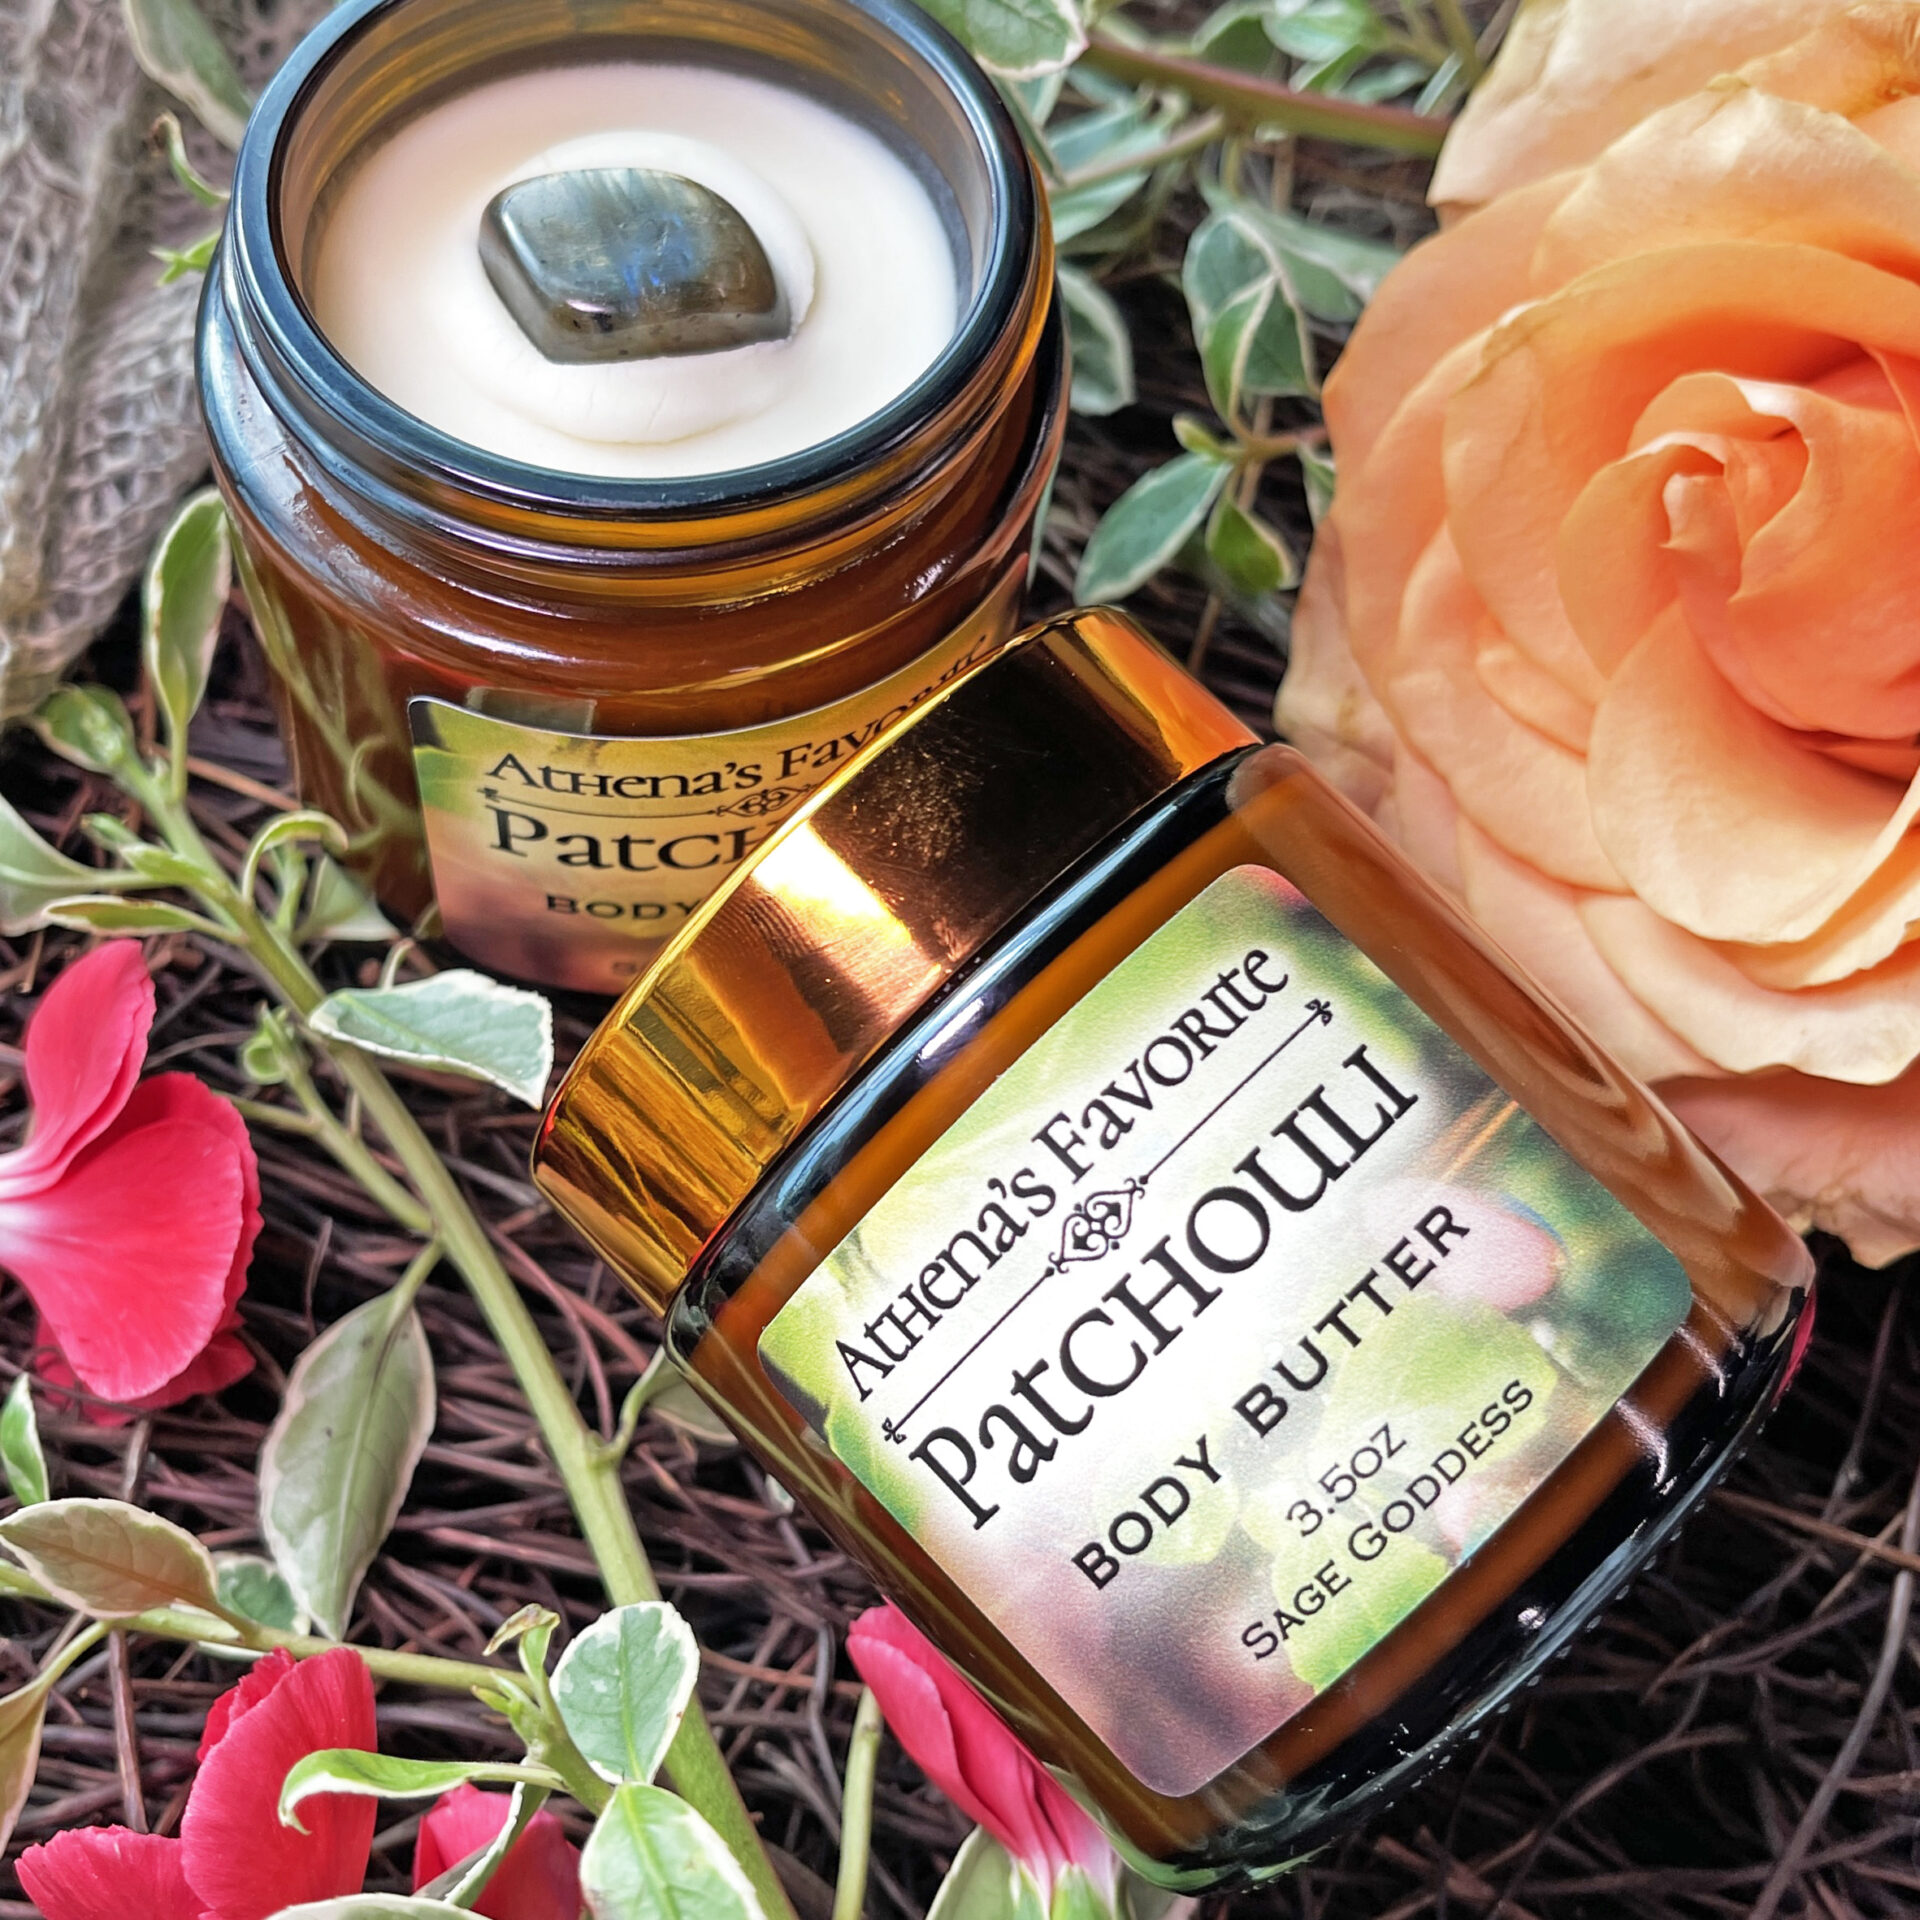 Image of Athena's Favorite Patchouli Body Butter